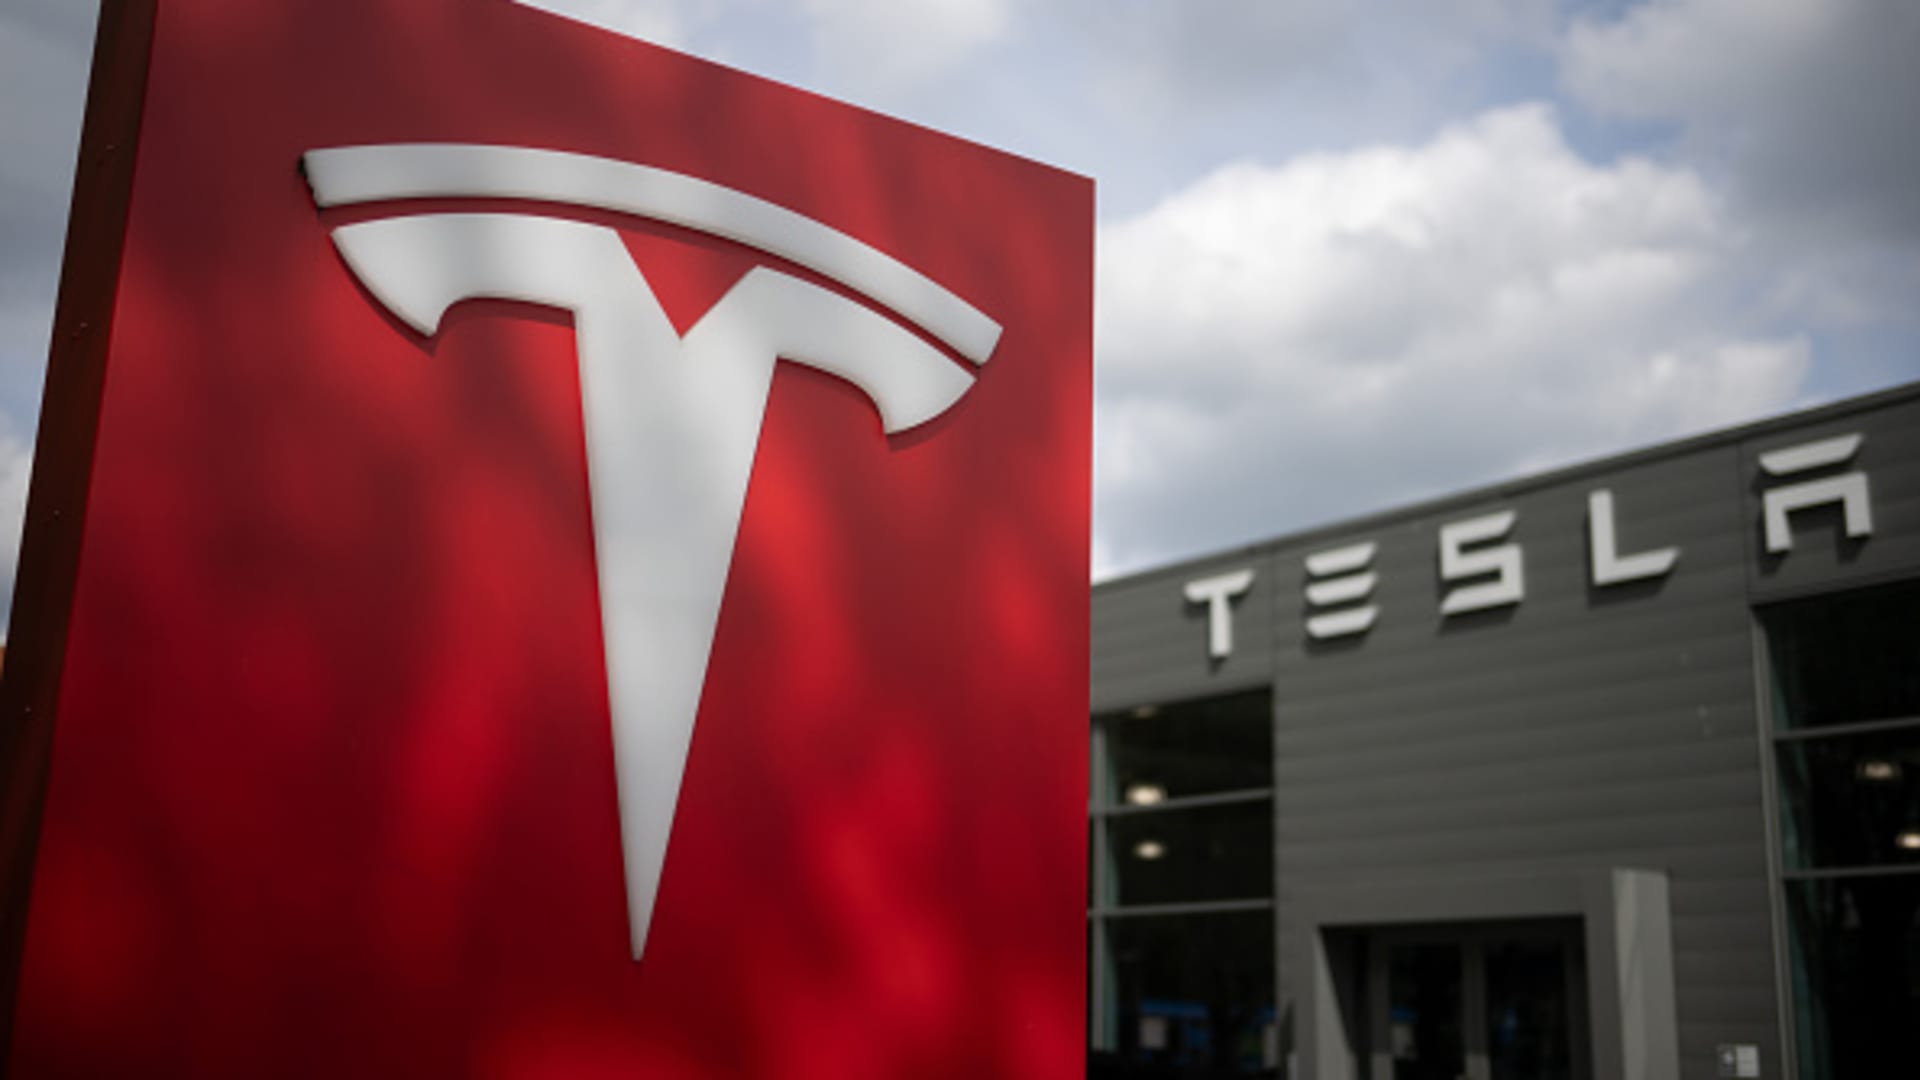 Jim Cramer says Tesla rose during short squeeze, but doubts ServiceNow sell call